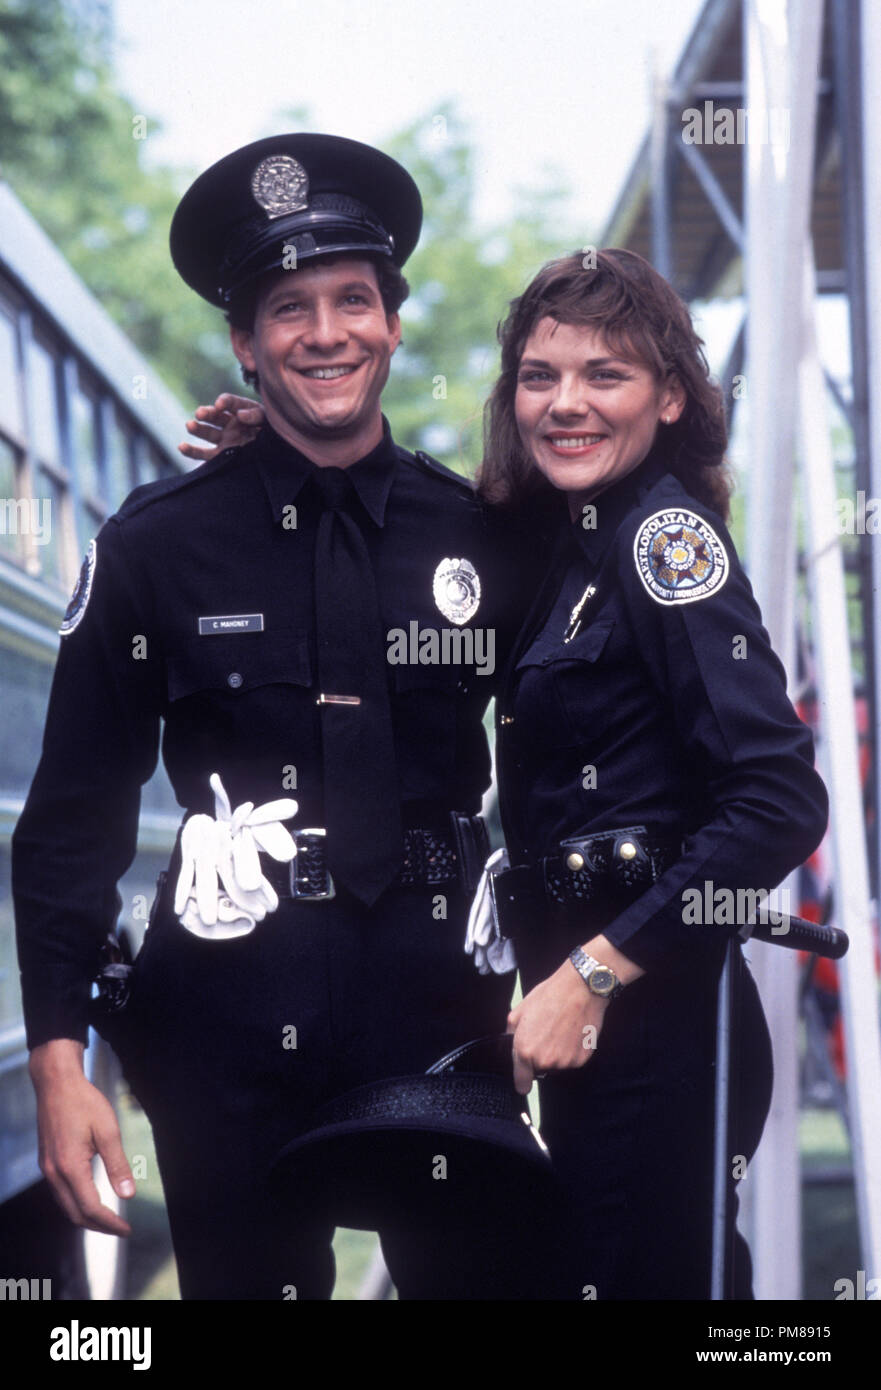 Studio Publicity Still from "Police Academy" Steve Guttenberg, Kim Cattrall  © 1984 Warner All Rights Reserved File Reference # 31706233THA For  Editorial Use Only Stock Photo - Alamy